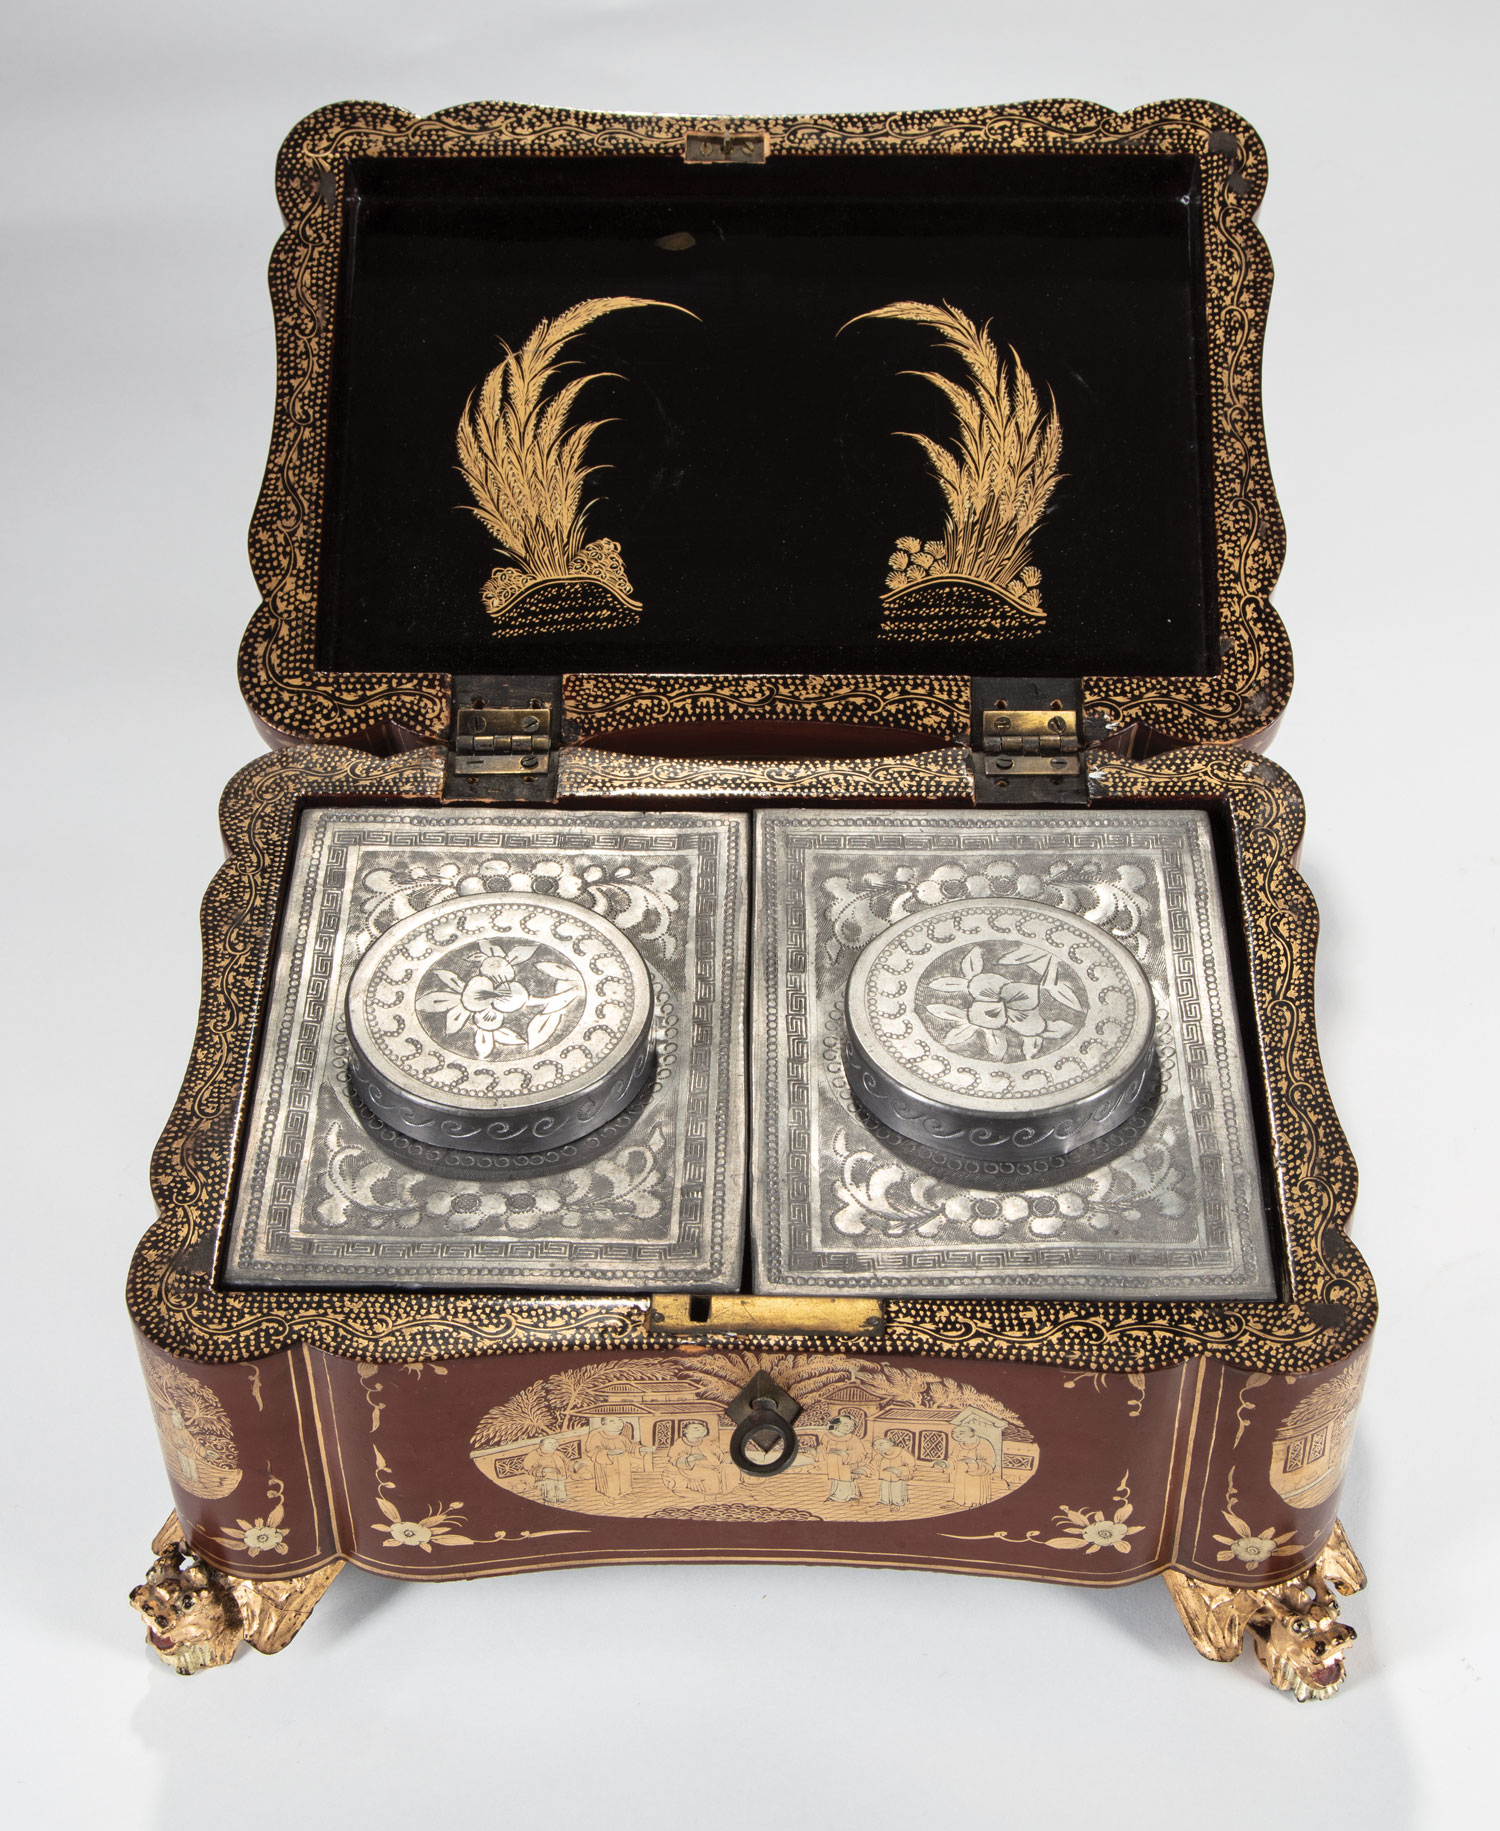 Chinese Gilt-Decorated Brown Lacquer Tea Caddy , 19th c., shaped rectangular form decorated with - Image 2 of 2